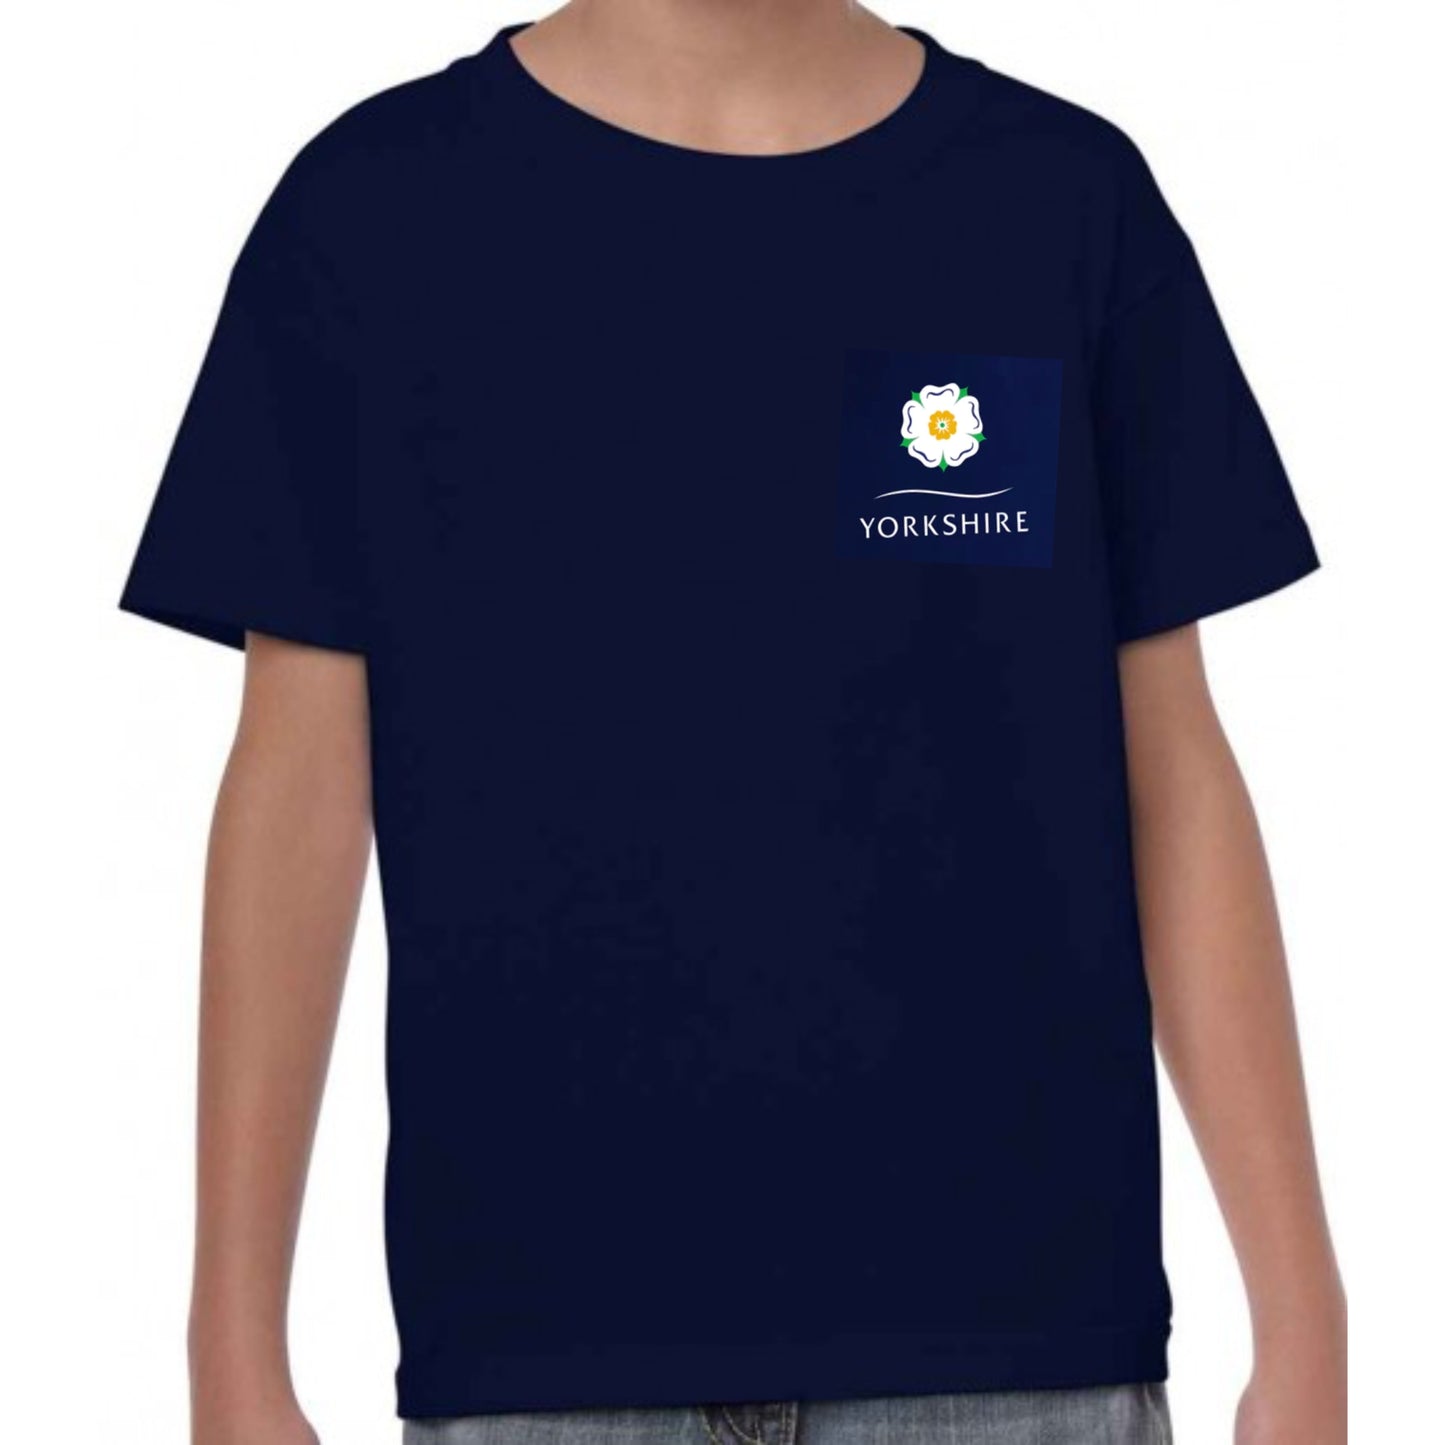 Yorkshire Rose Children's T-Shirt - The Great Yorkshire Shop